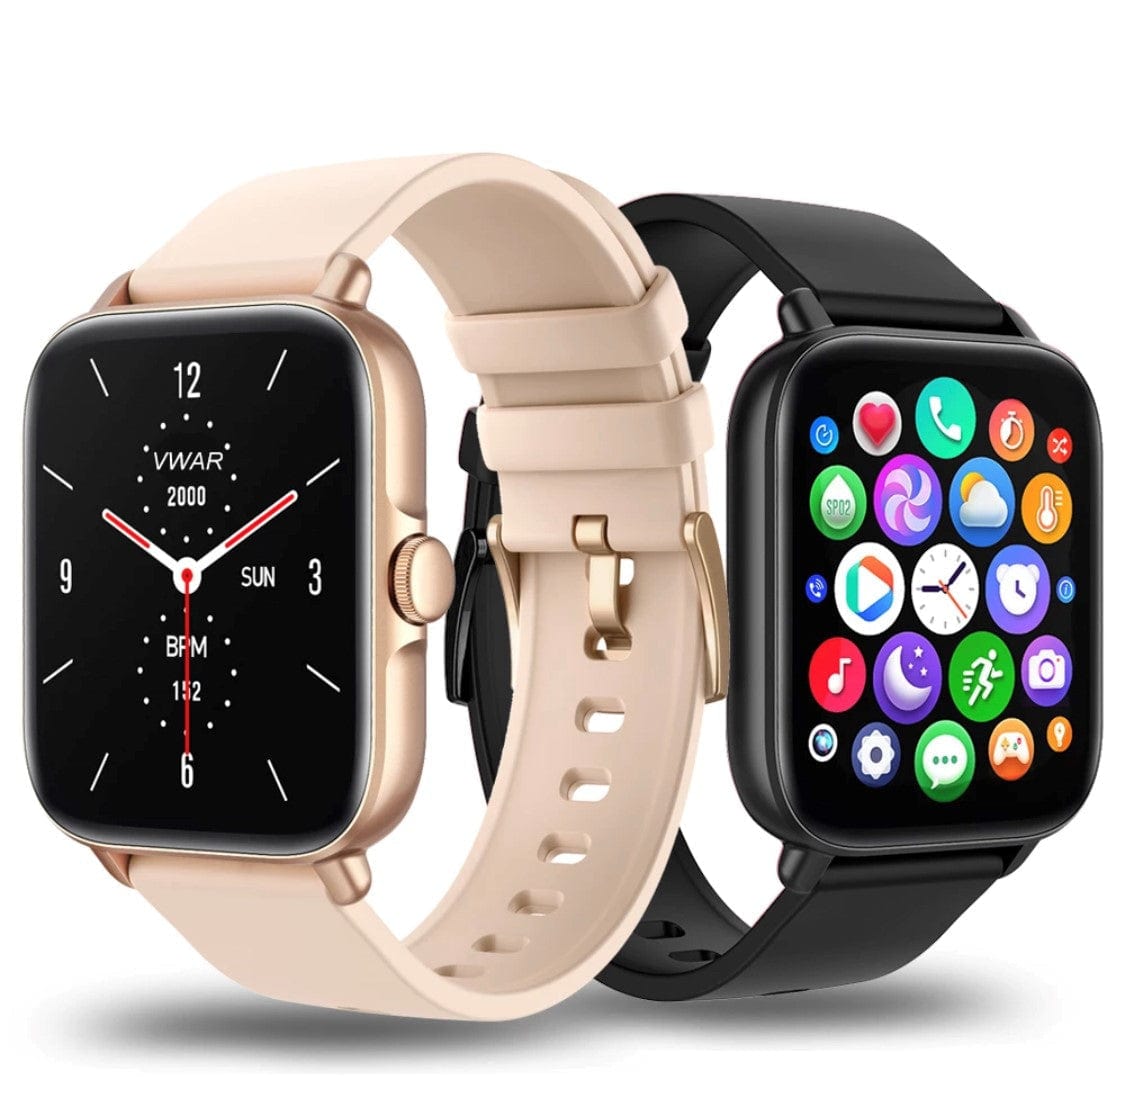 Smart Watch South Africa Watches Silver &  Quot Smartoby P28 Plus Silver& Quot with Bluetooth Calling  -- Extra Straps Availible